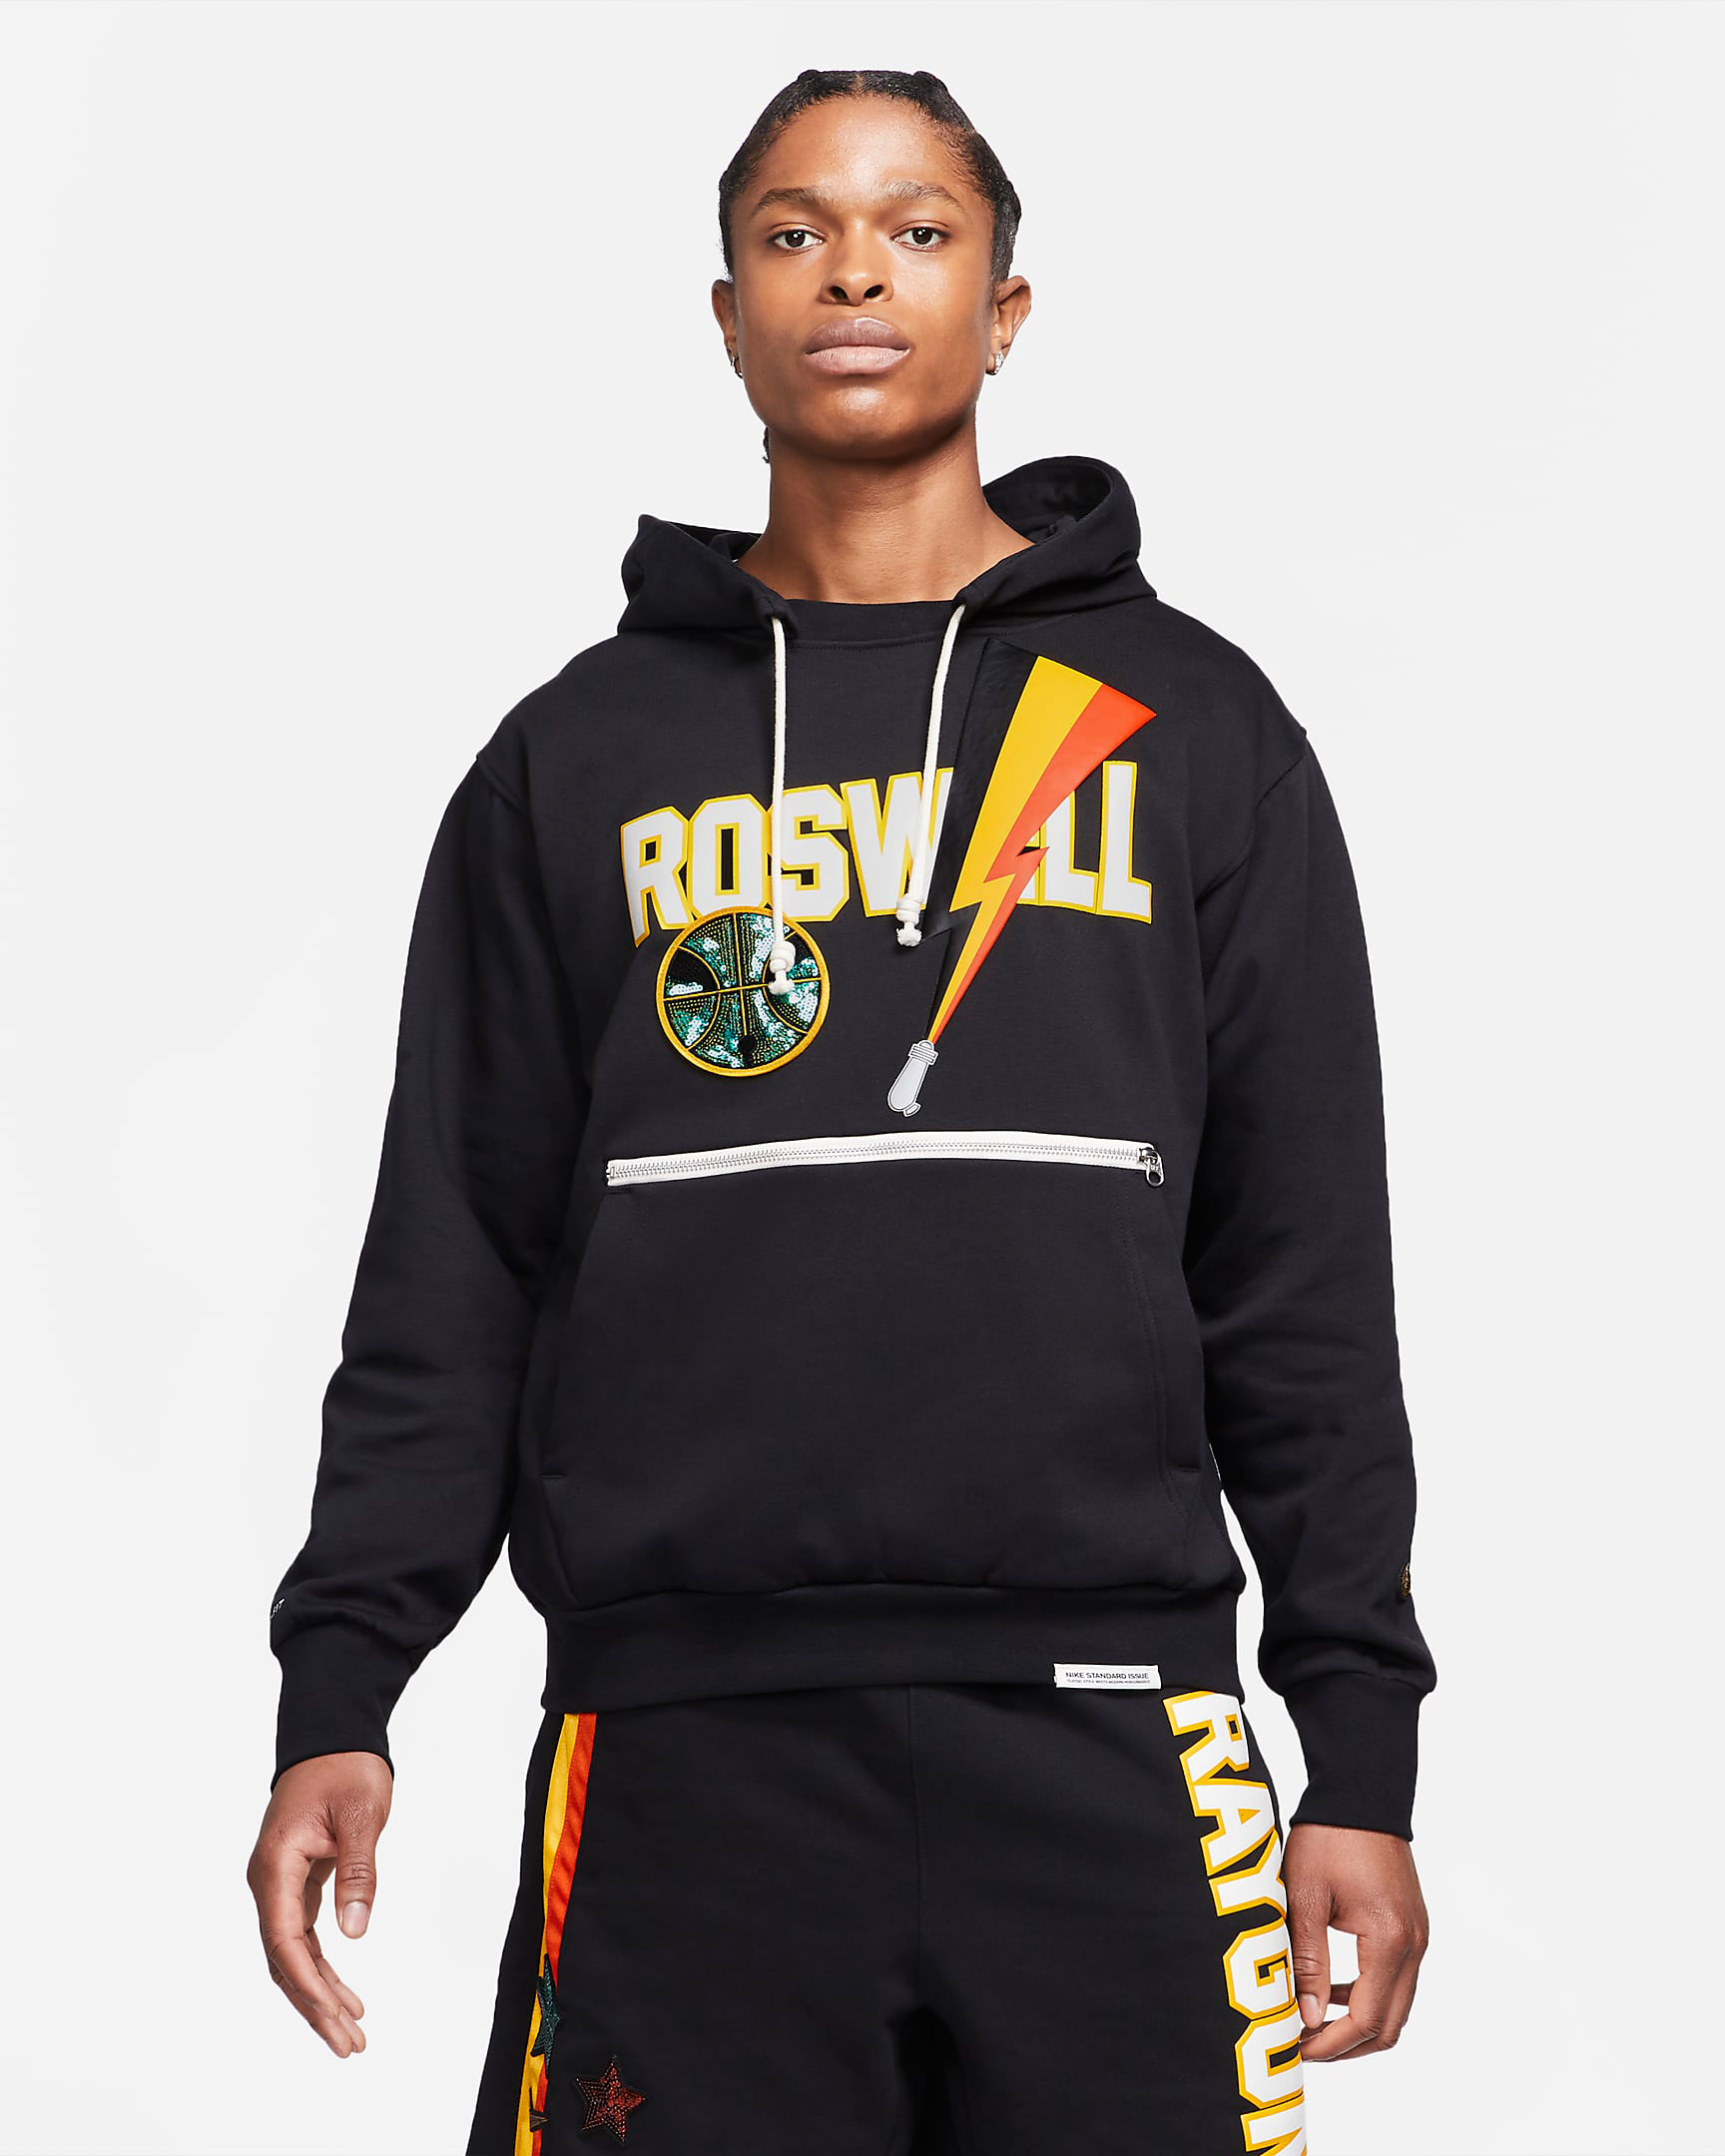 Nike Roswell Rayguns Jersey — Major